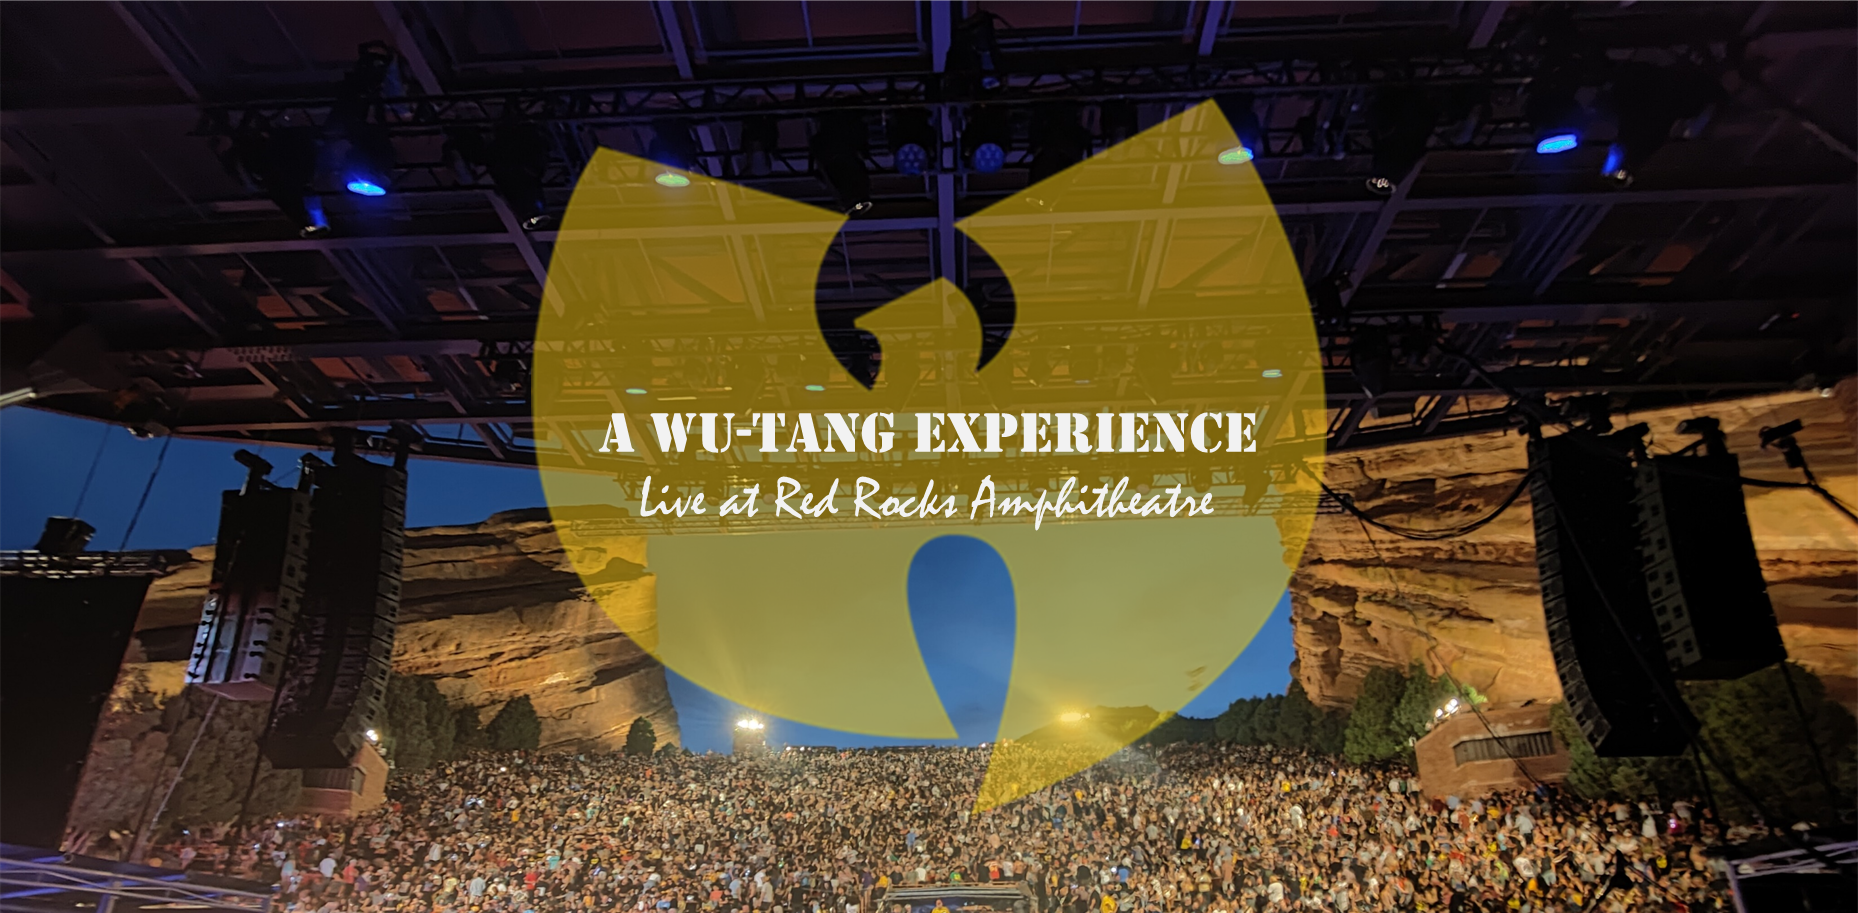 SPECIAL SCREENING OF “A WU-TANG EXPERIENCE: LIVE AT RED ROCKS AMPHITHEATRE” AND POST SCREENING DISCUSSION WITH RZA